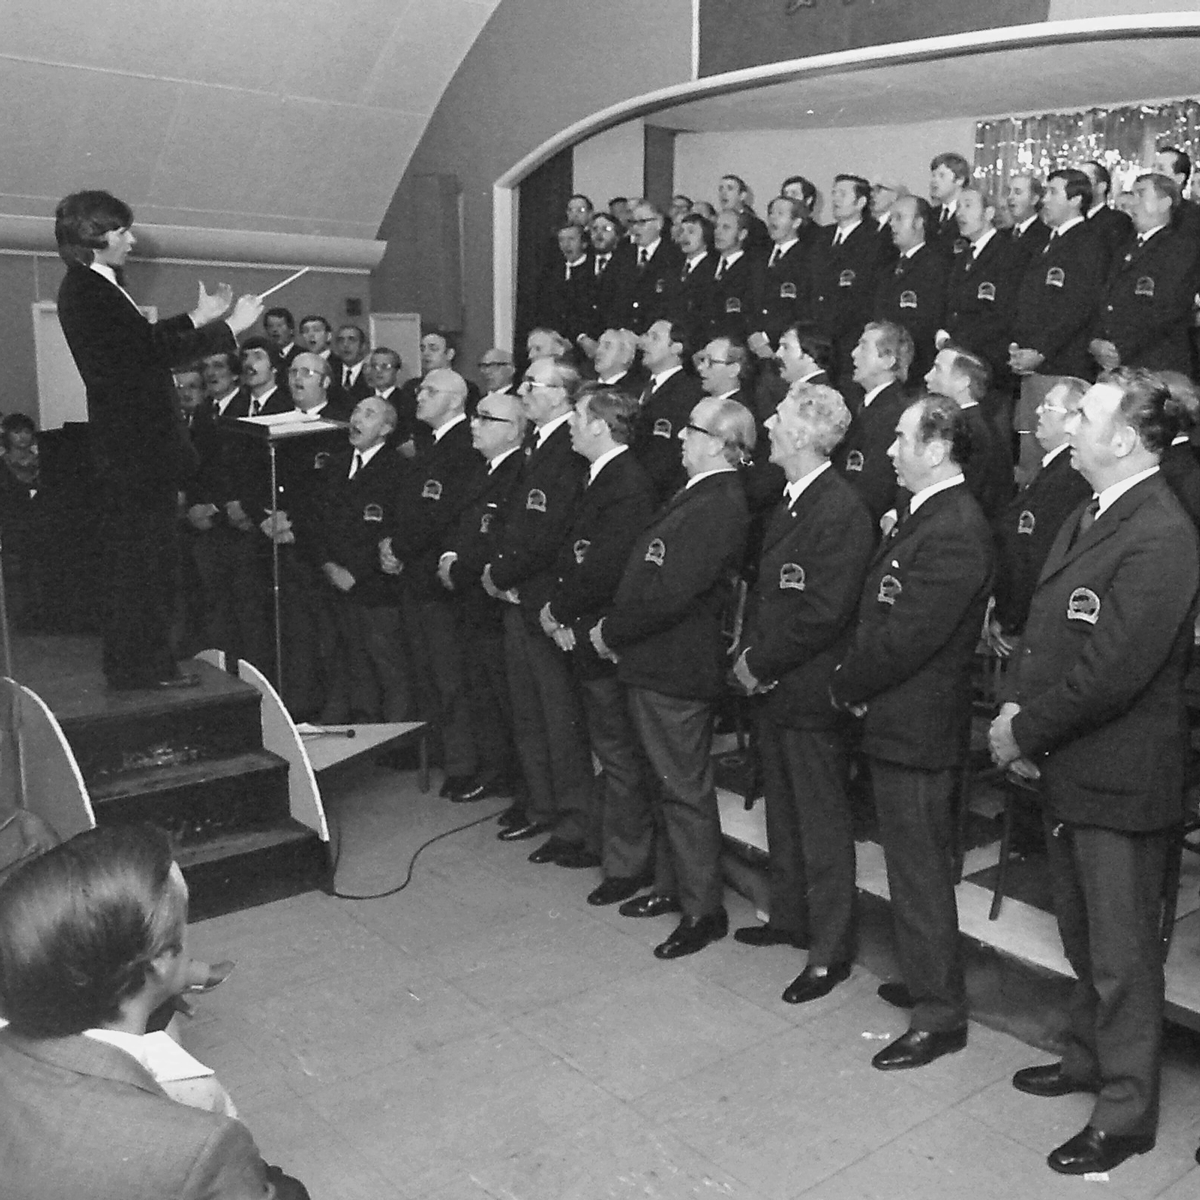 Black and white image of the Snowdon Male Voice Choir